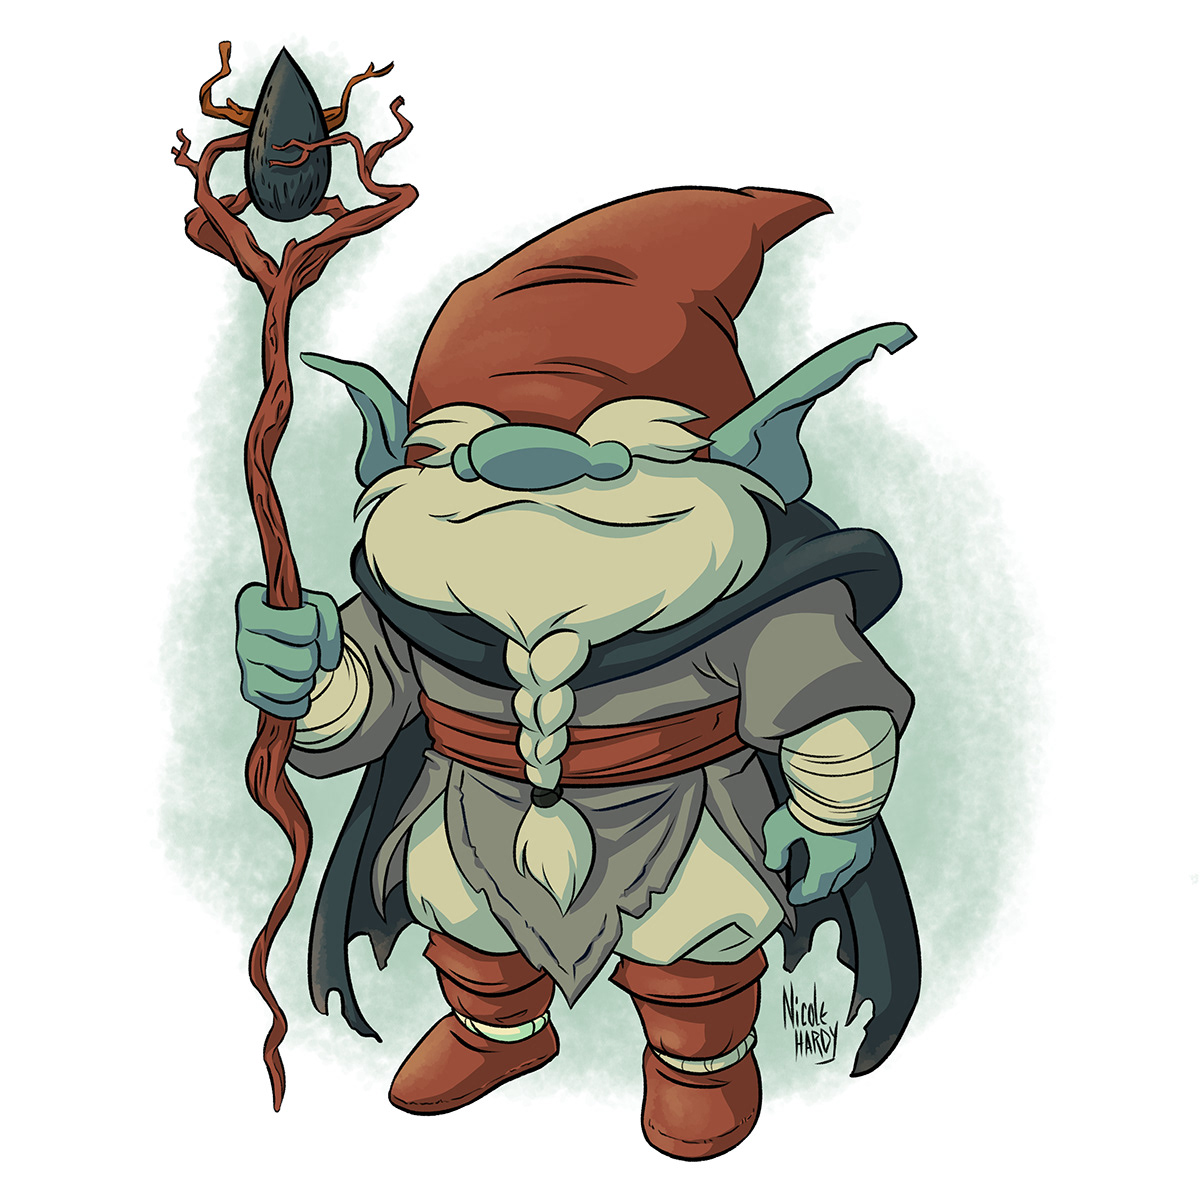 gnome Character design  cartoon dnd Dungeons and Dragons dwarf fantasy rpg